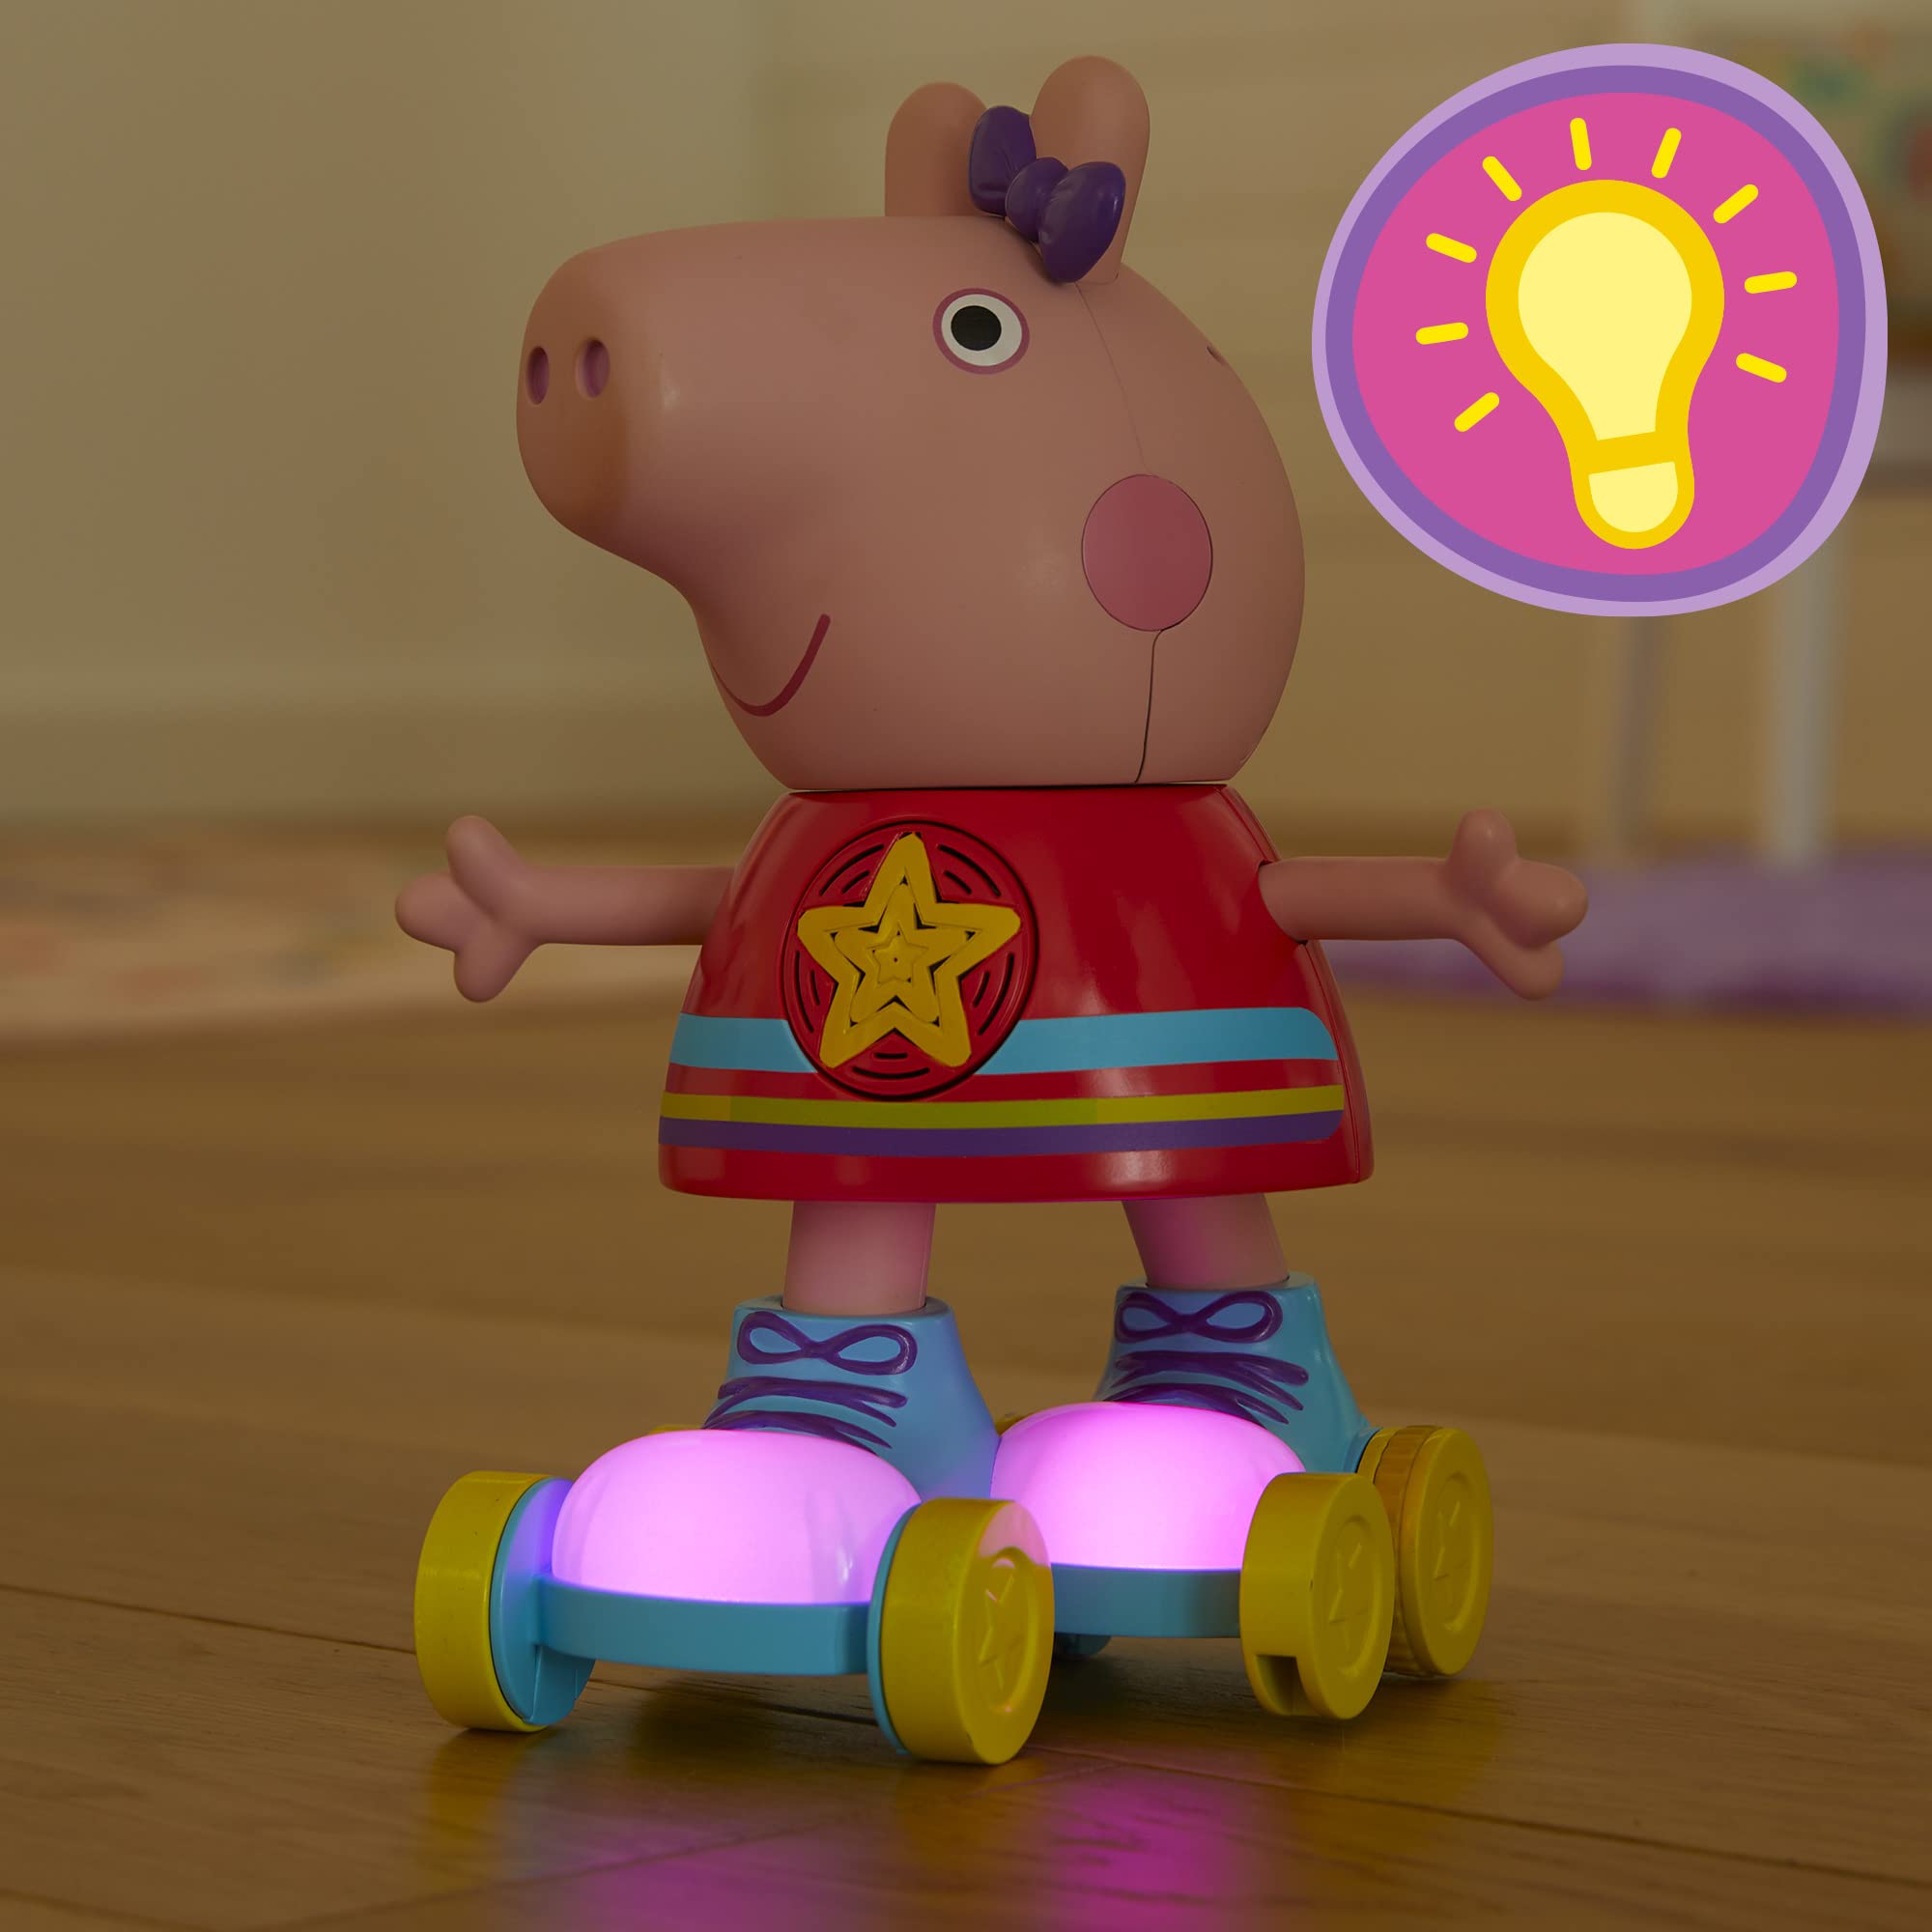 Peppa Pig Disco Peppa Roller Skating Doll, Pull-and-Go Action, 11 Inch Figures, Preschool Toys for 3 Year Old Girls and Boys and Up, with Lights, Speech, and Music